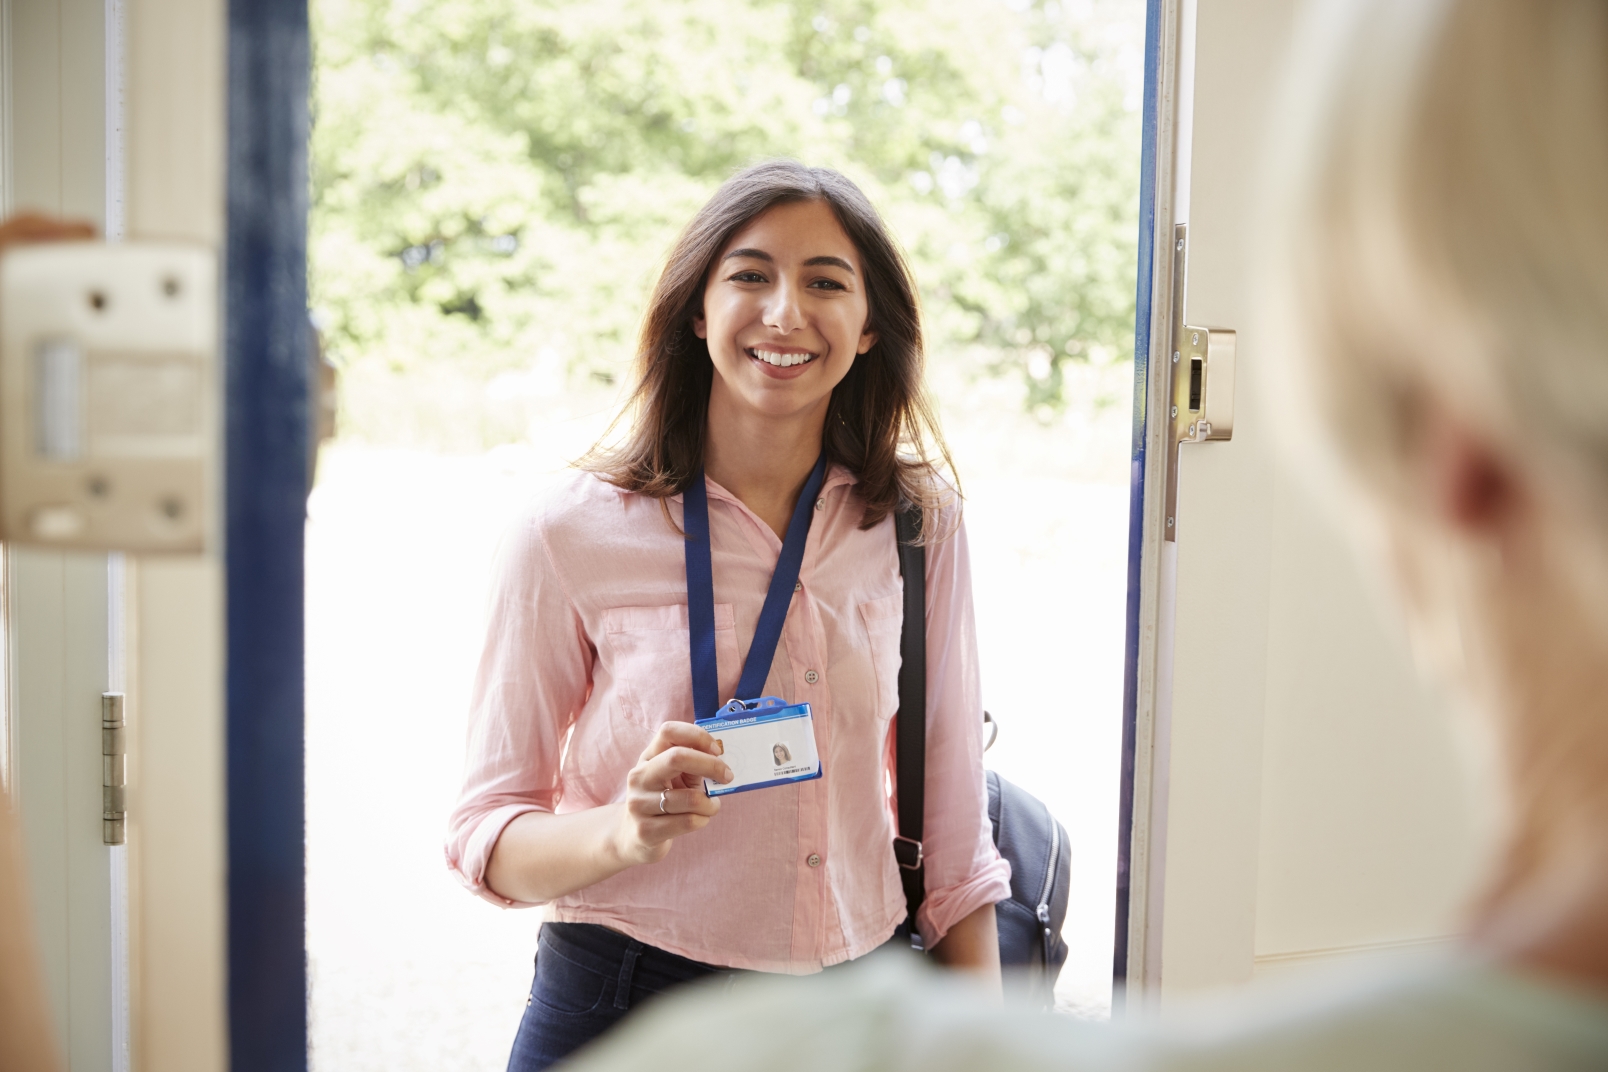 Professional woman entering a home showing her ID card